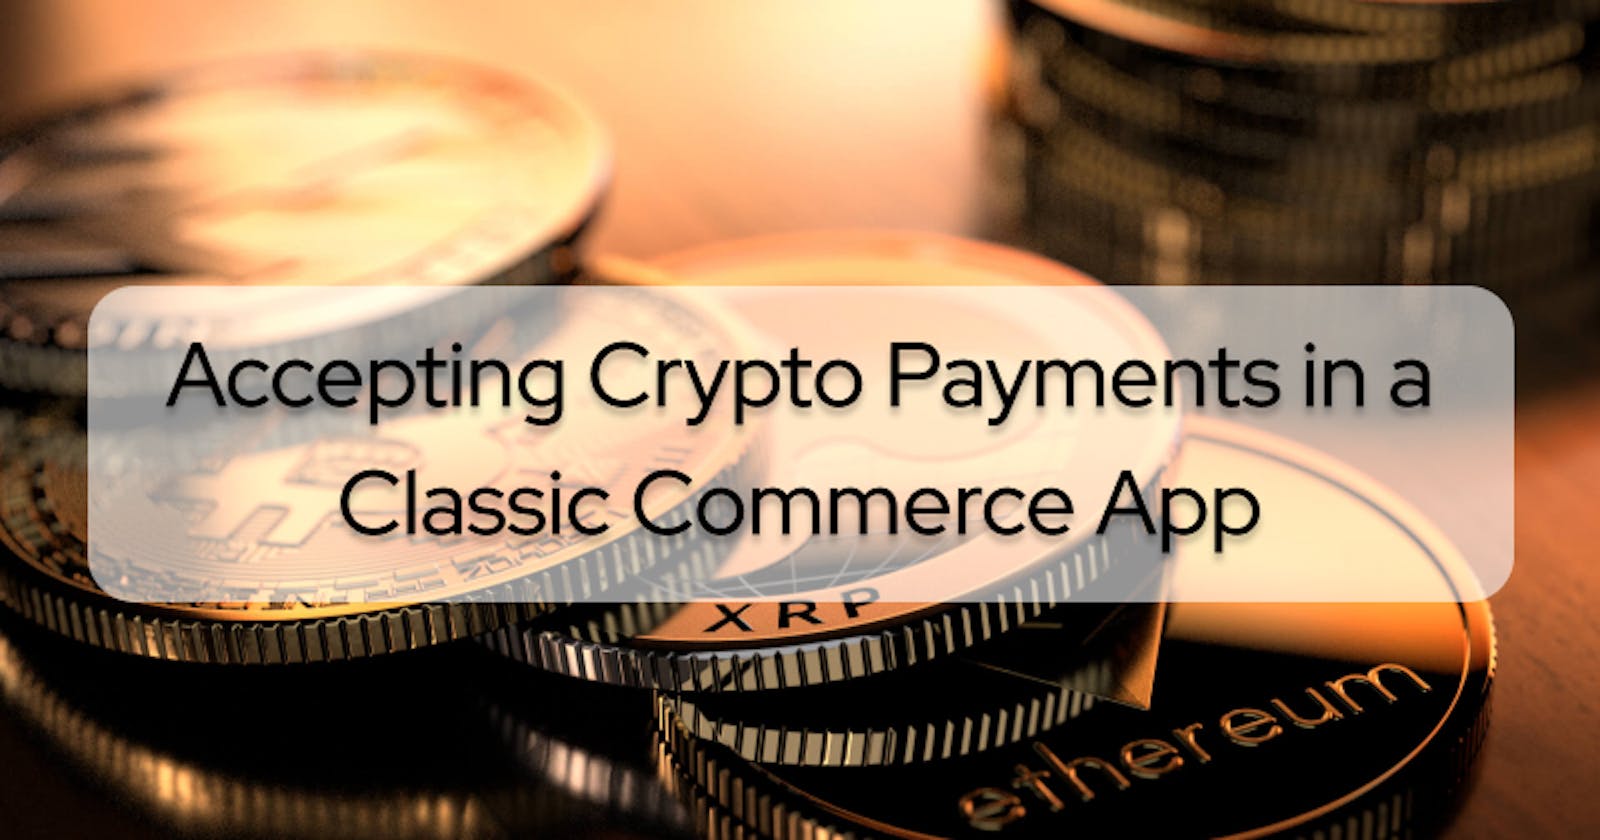 Accepting Crypto Payments in a Classic Commerce App